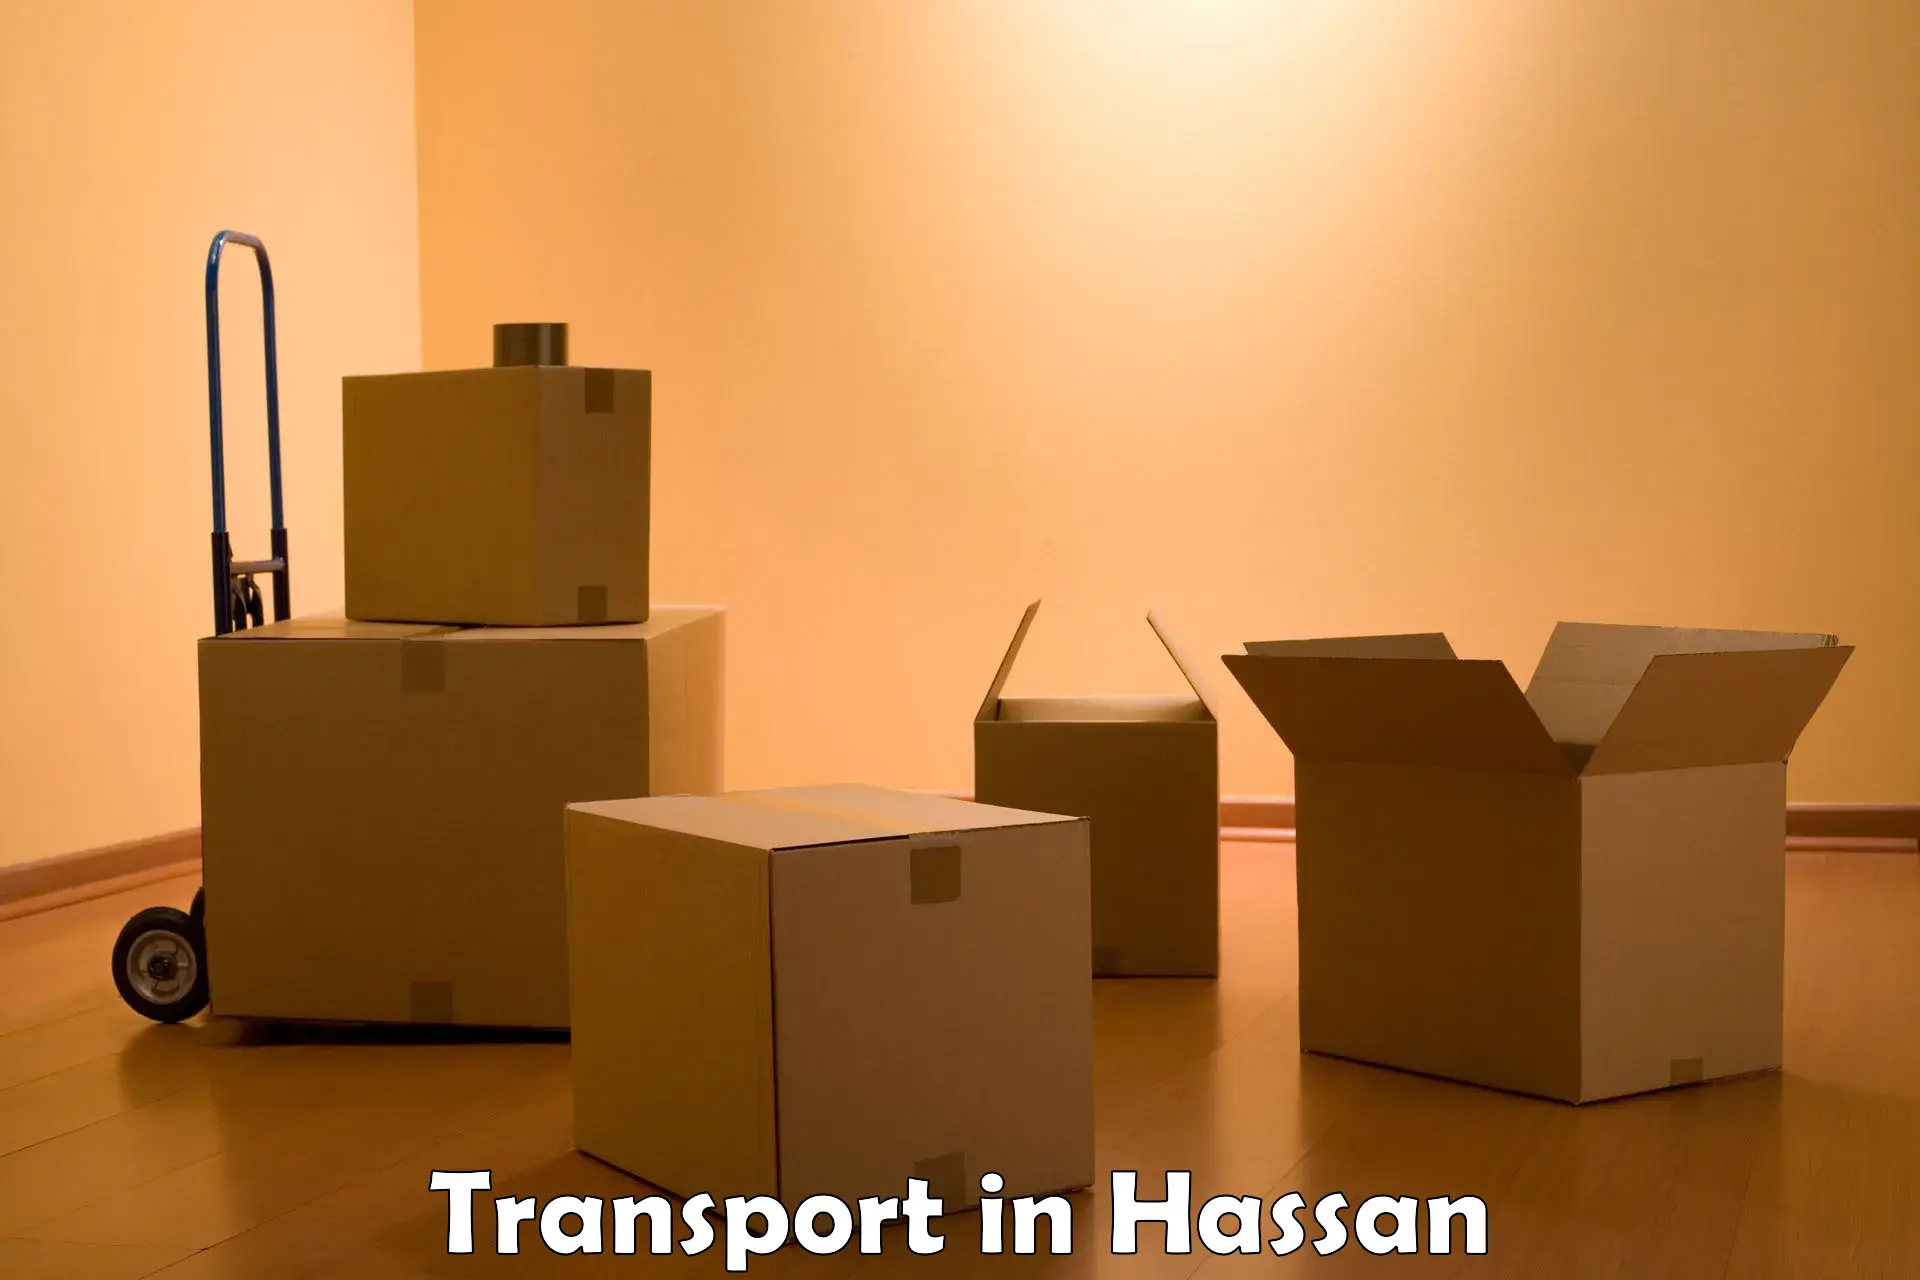 Cycle transportation service in Hassan